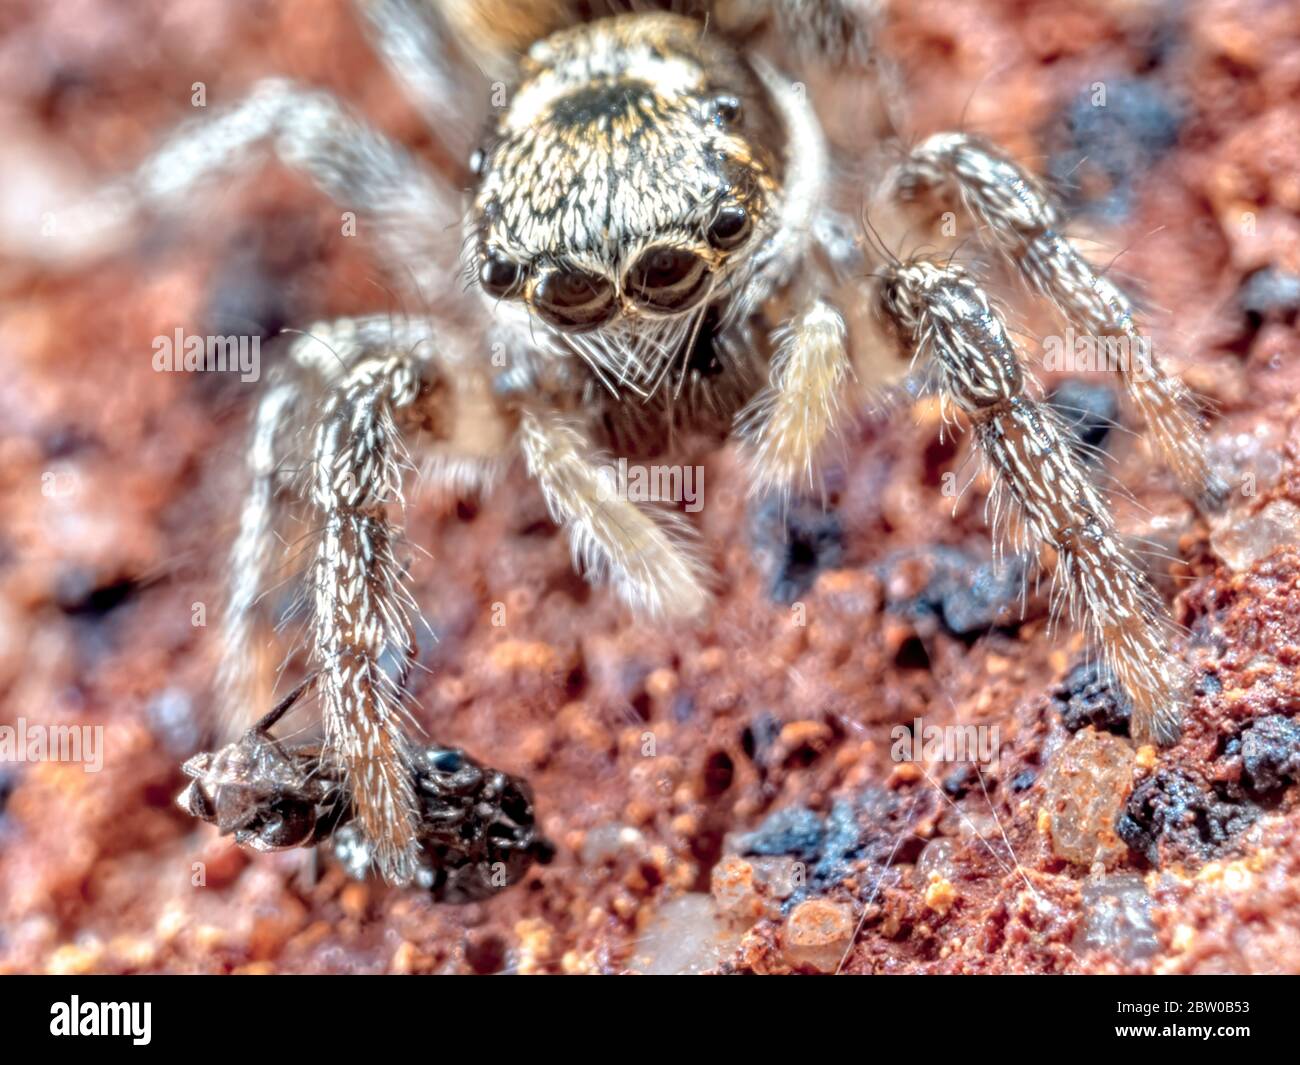 A Jumping Spider (Heliophanus cupreus) showing off its captured fly. Found on a wall in the back garden. Stock Photo